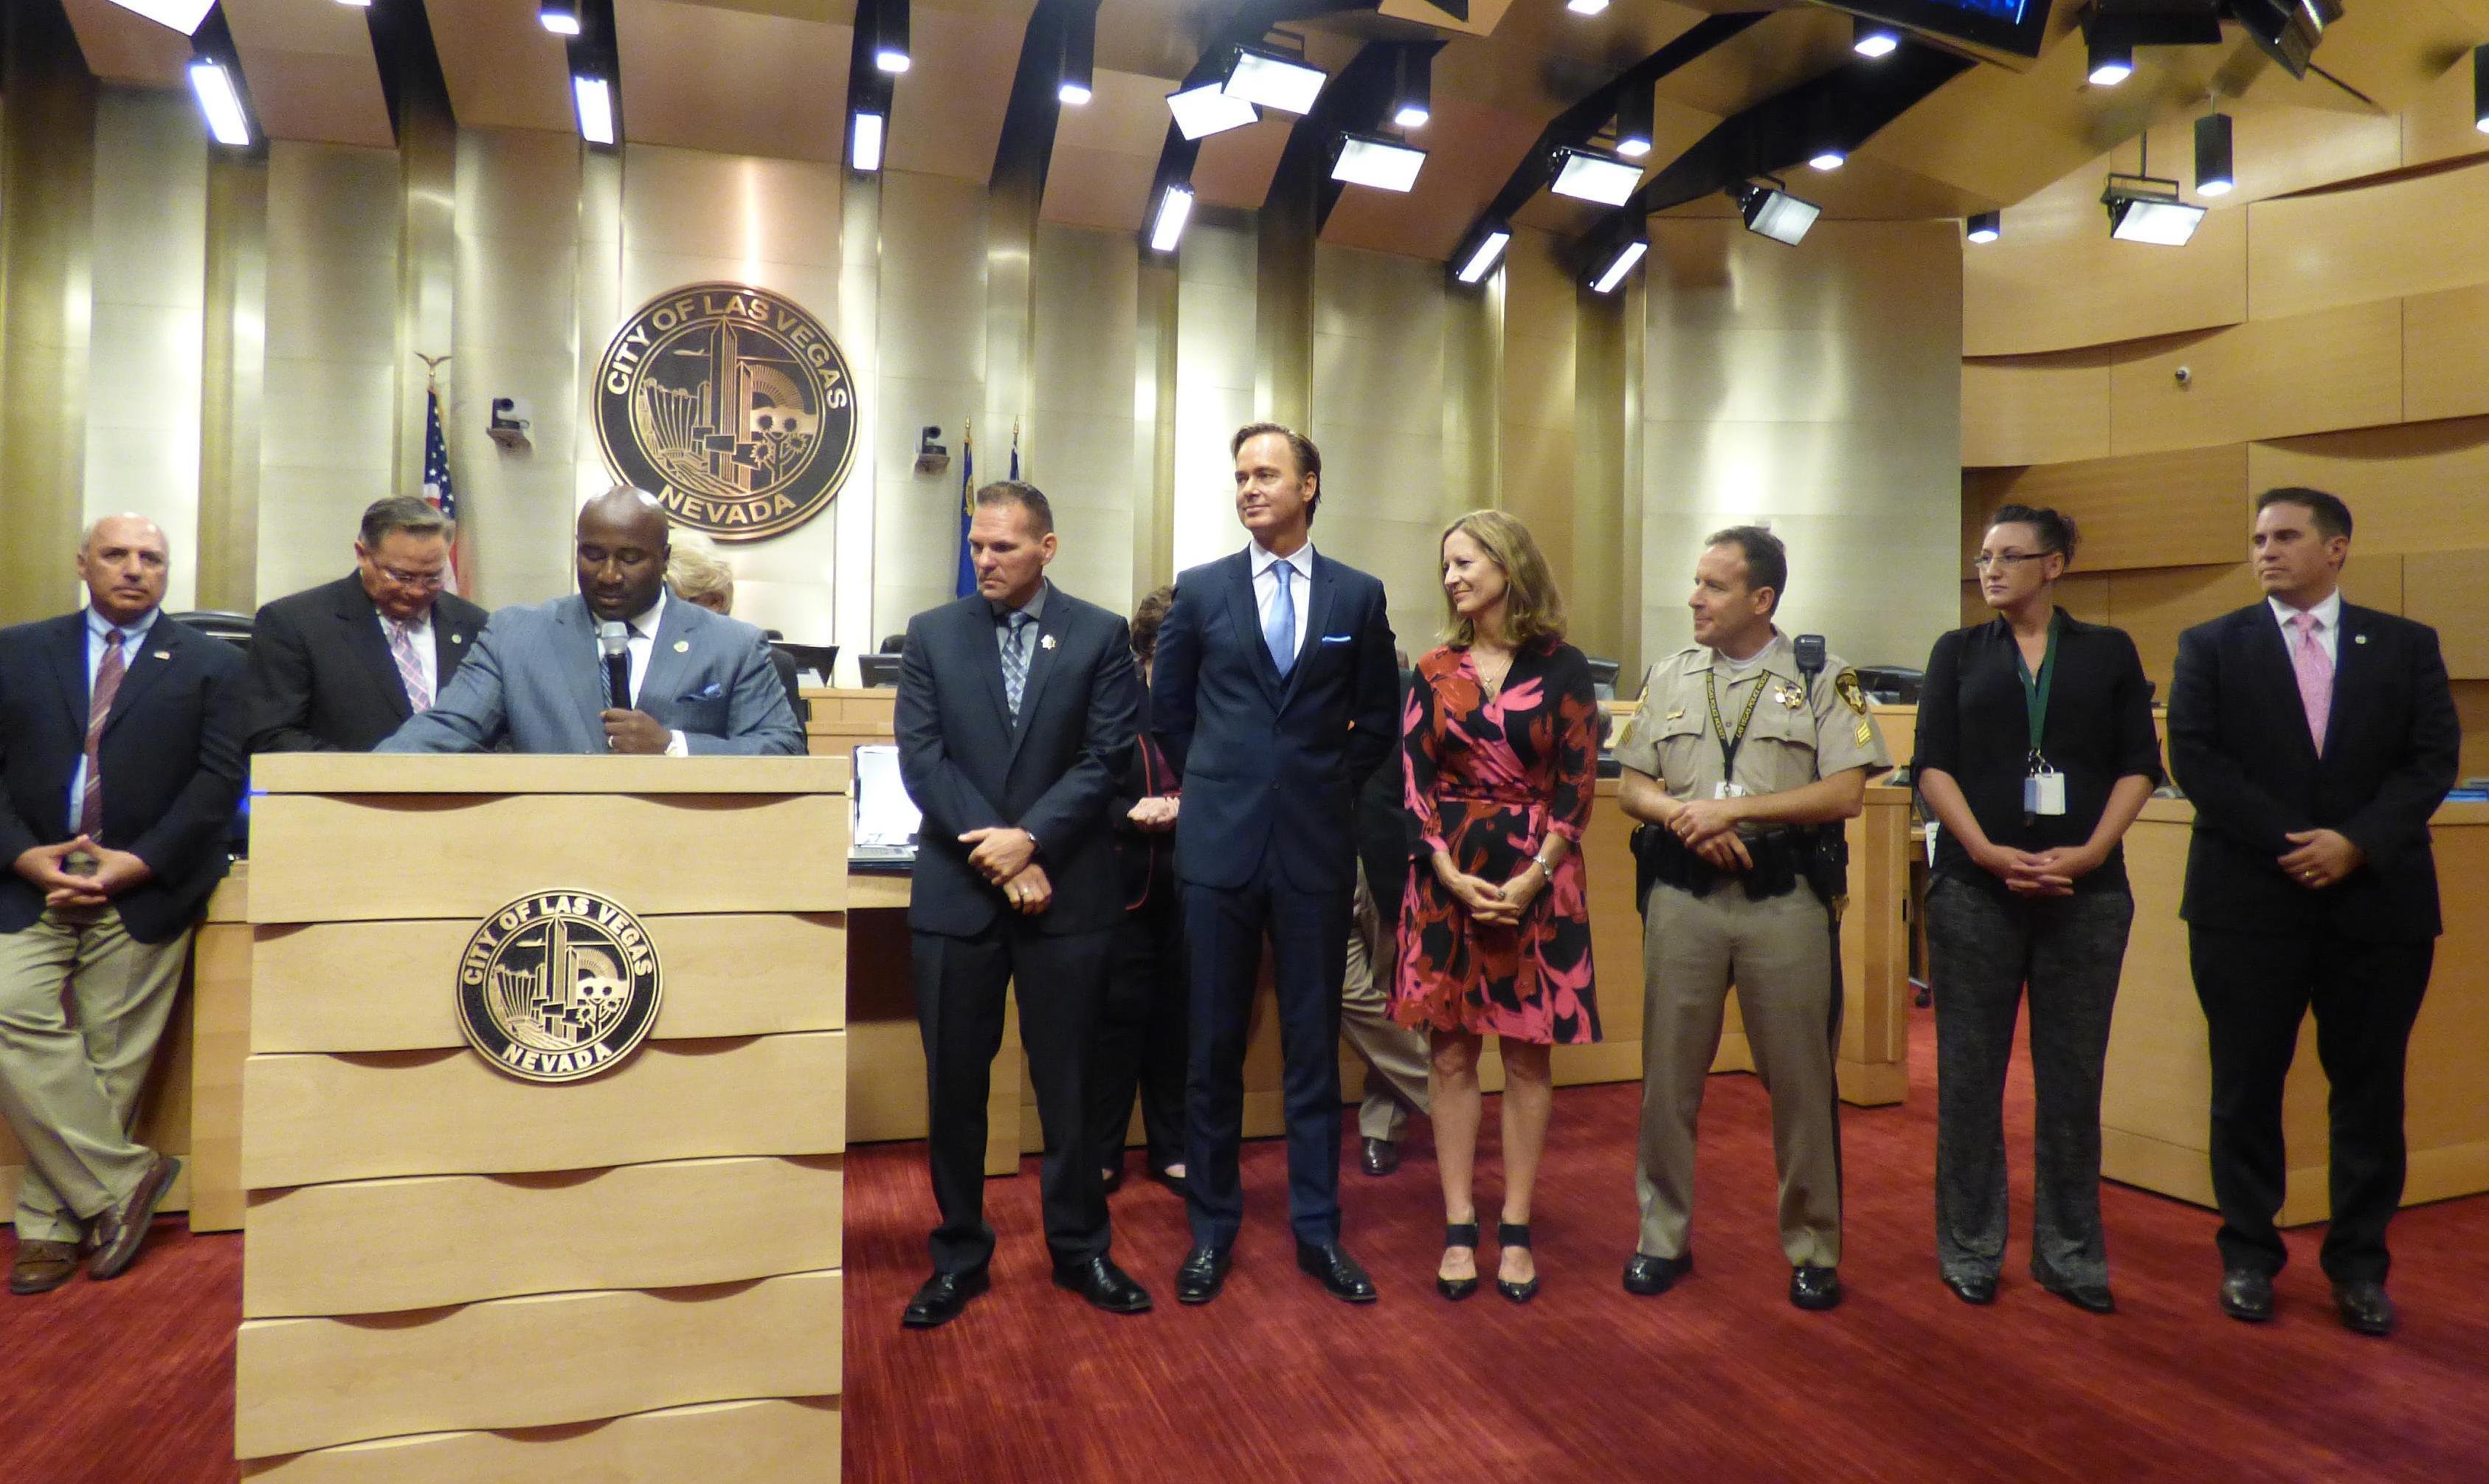 Las Vegas City Hall on Wednesday, October 7th,2015 where Lt.John Pelletier, Project Director Christian Schoyen, Julie Murray, Sgt Phil Merges, Jessica Heredia and Pastor Matthew Teis receives the honorary award: Recognition of Your Contribution to the Community by Mayor Carolyn Goodman and the City Council for the Heroes United initiative of turning around the community with the highest violent crime in Las Vegas.